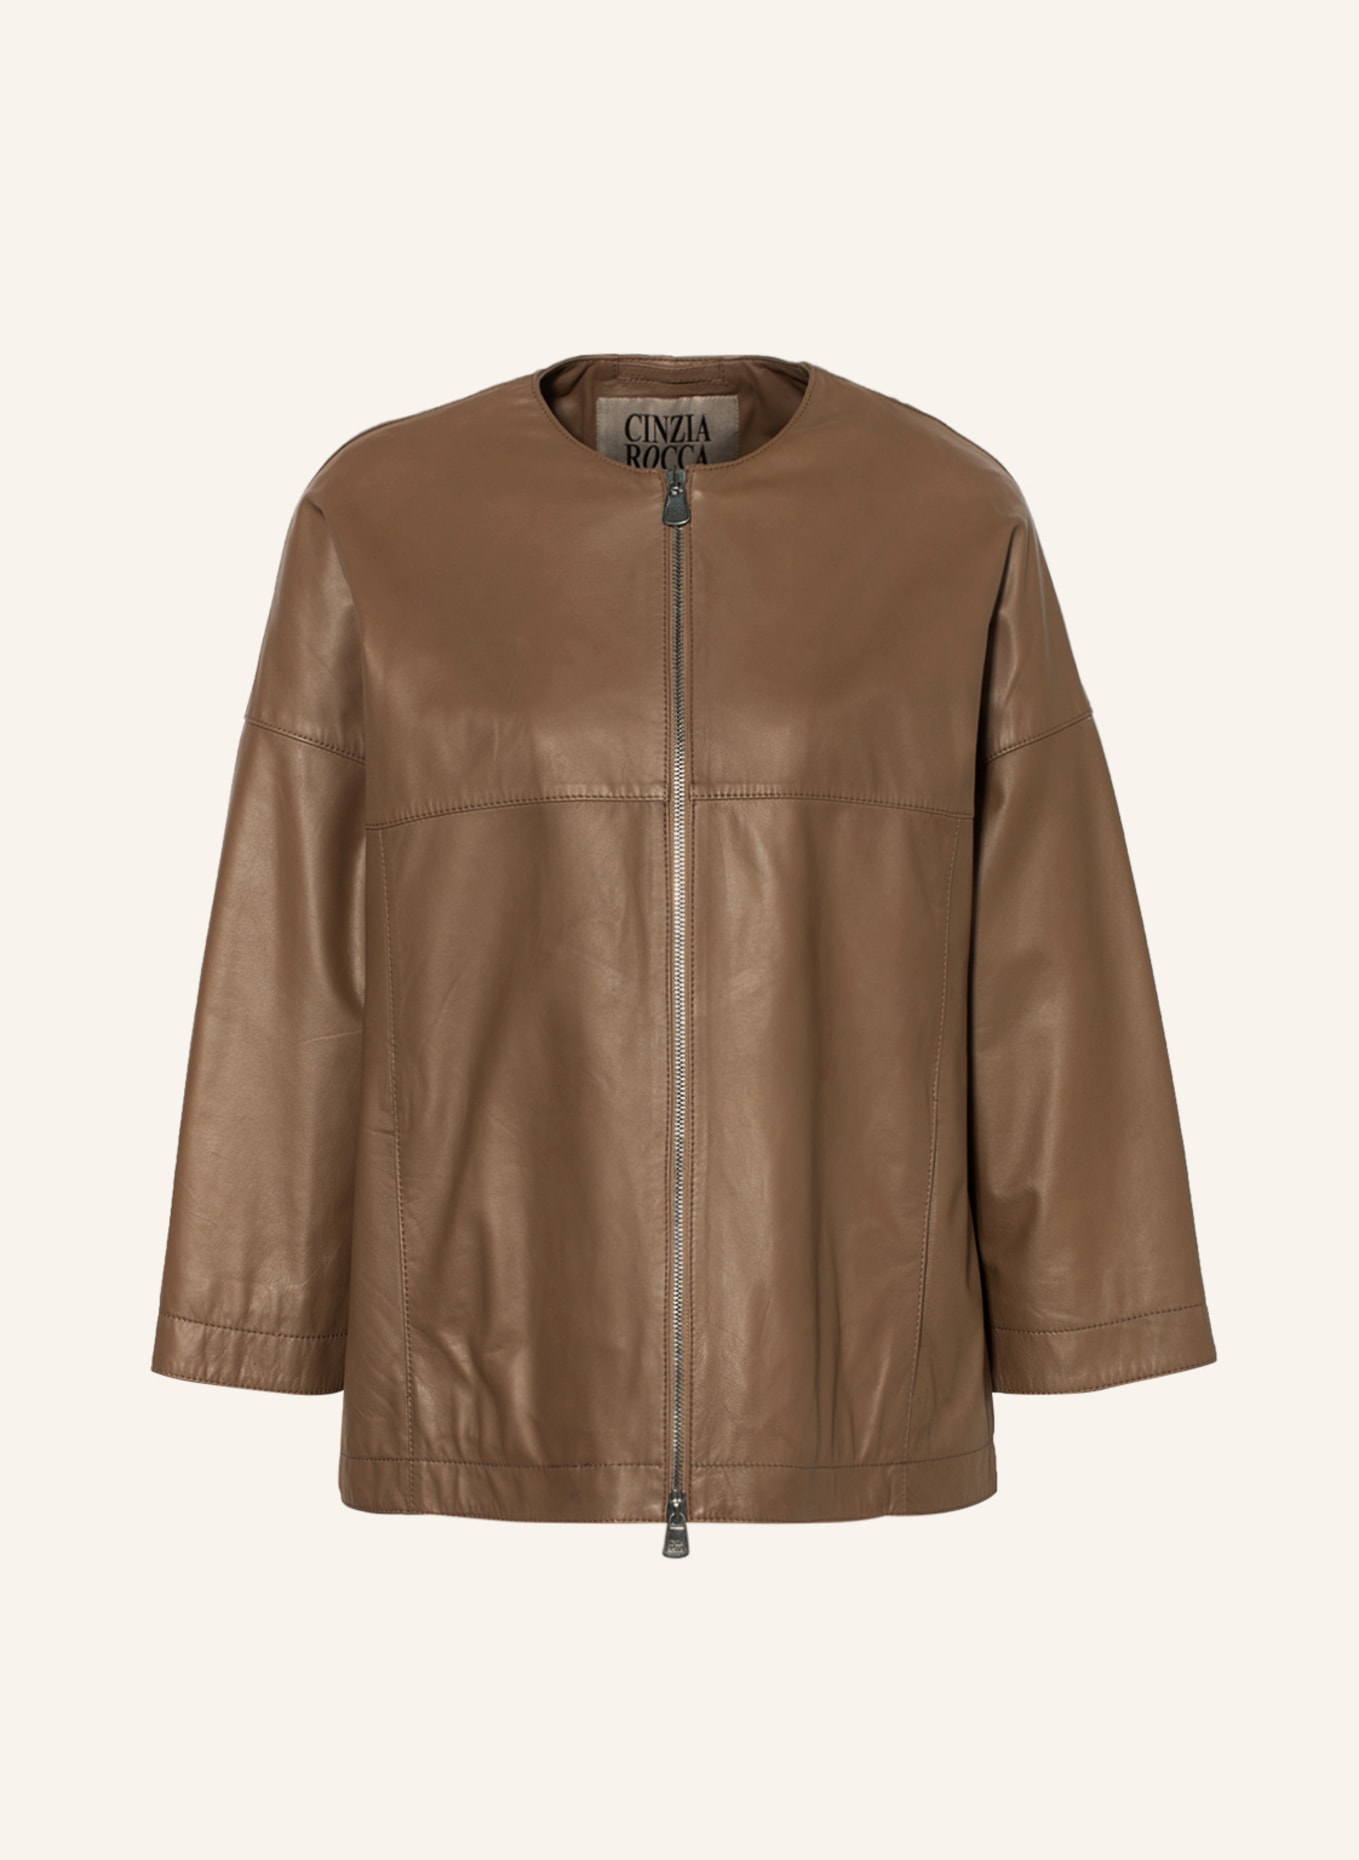 ICONS CINZIA ROCCA Leather jacket with 3/4 sleeves, Color: BROWN (Image 1)